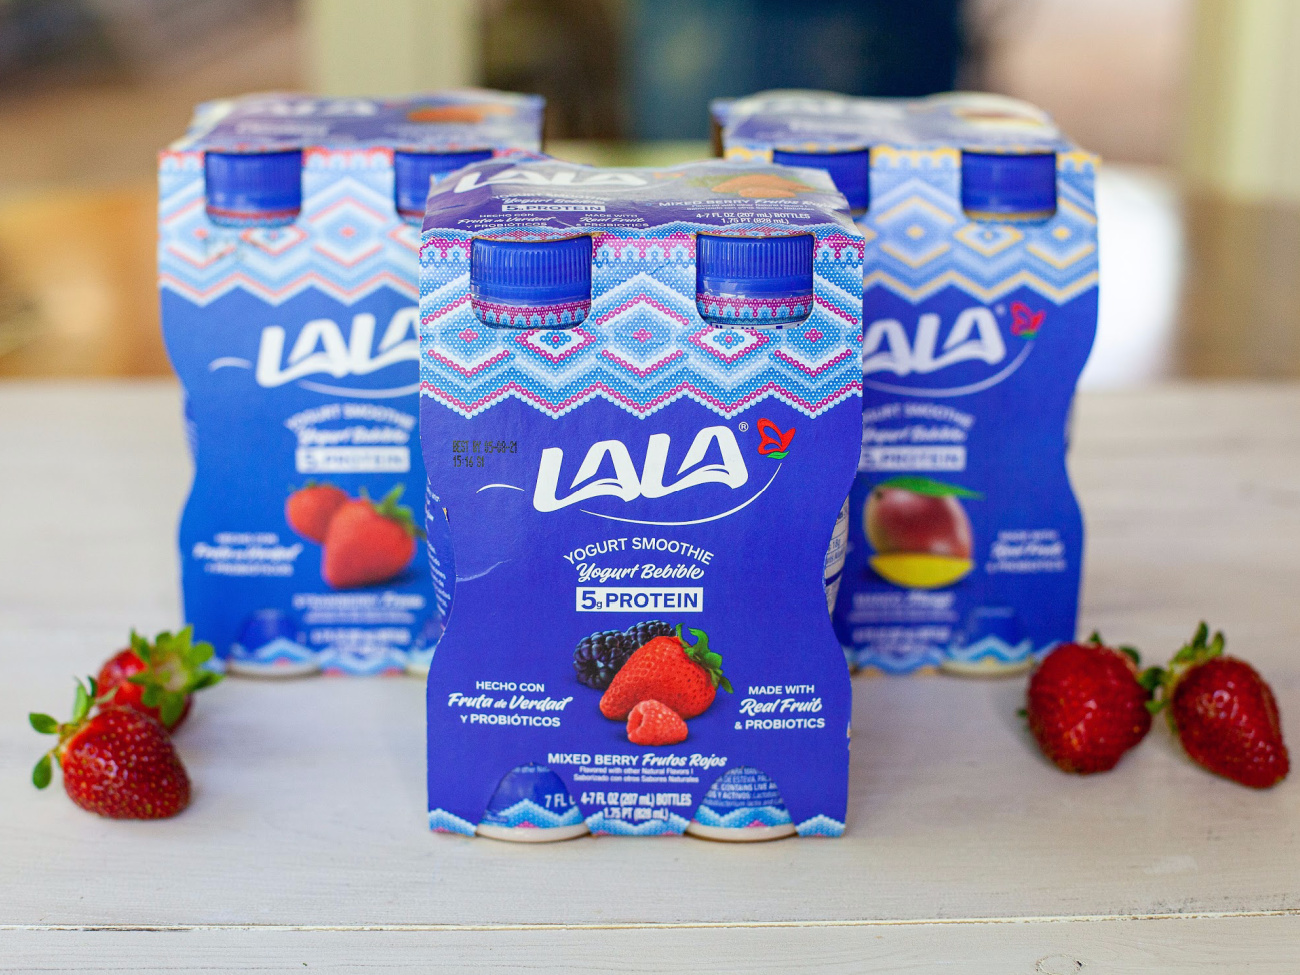 High Value LALA Yogurt Smoothies Coupons Means Great Taste For Just 62¢ Per Bottle!